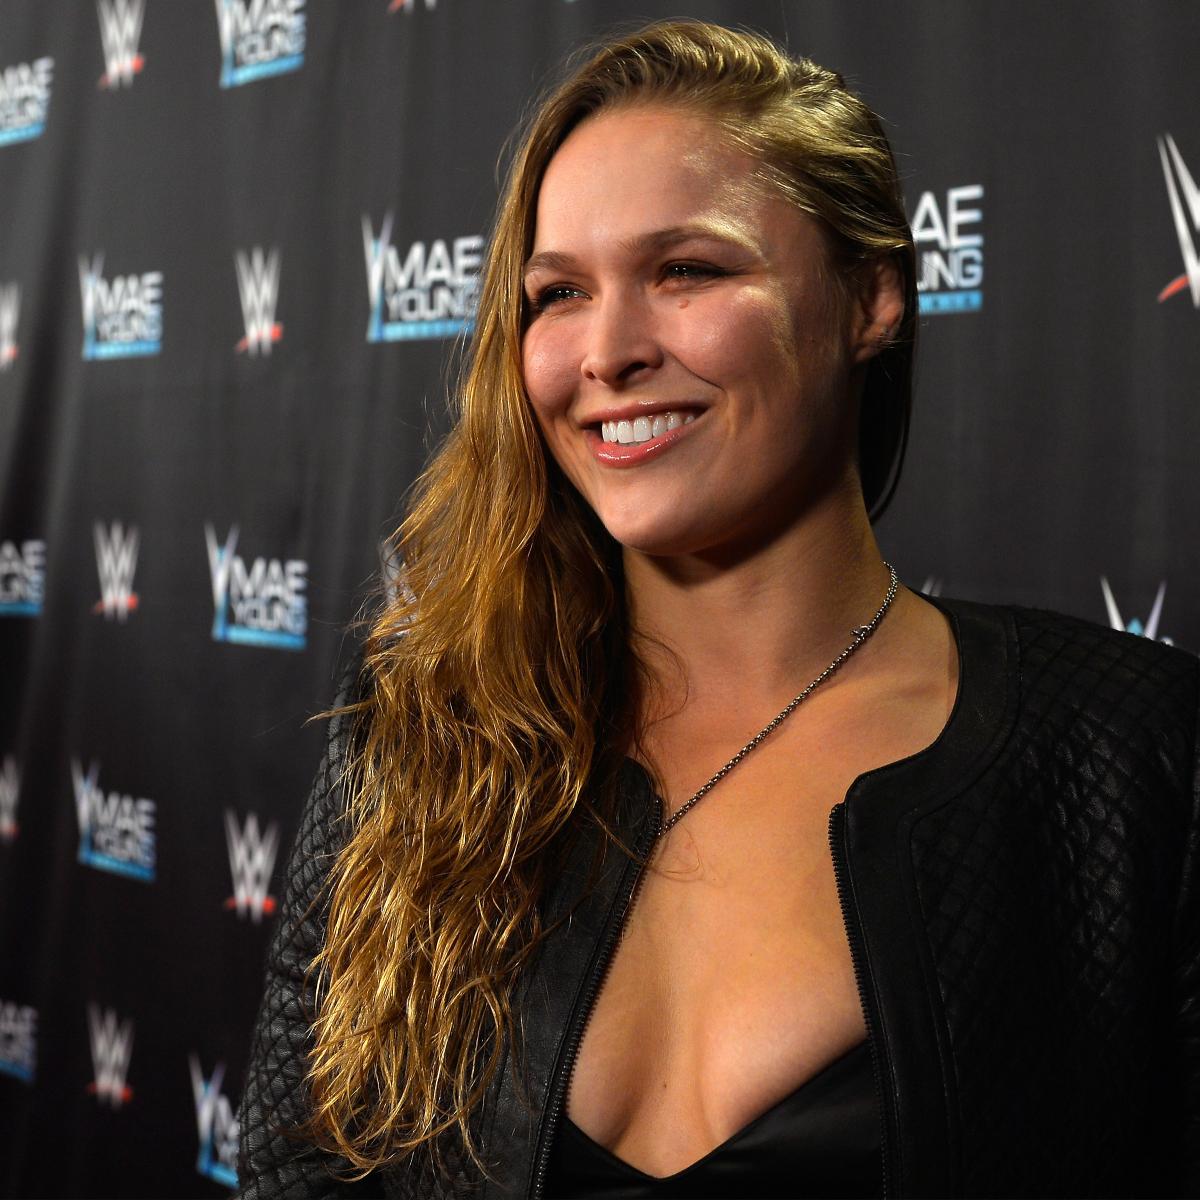 Ronda Rousey Does Ring Drills at WWE Performance Center Ahead of WrestleMania